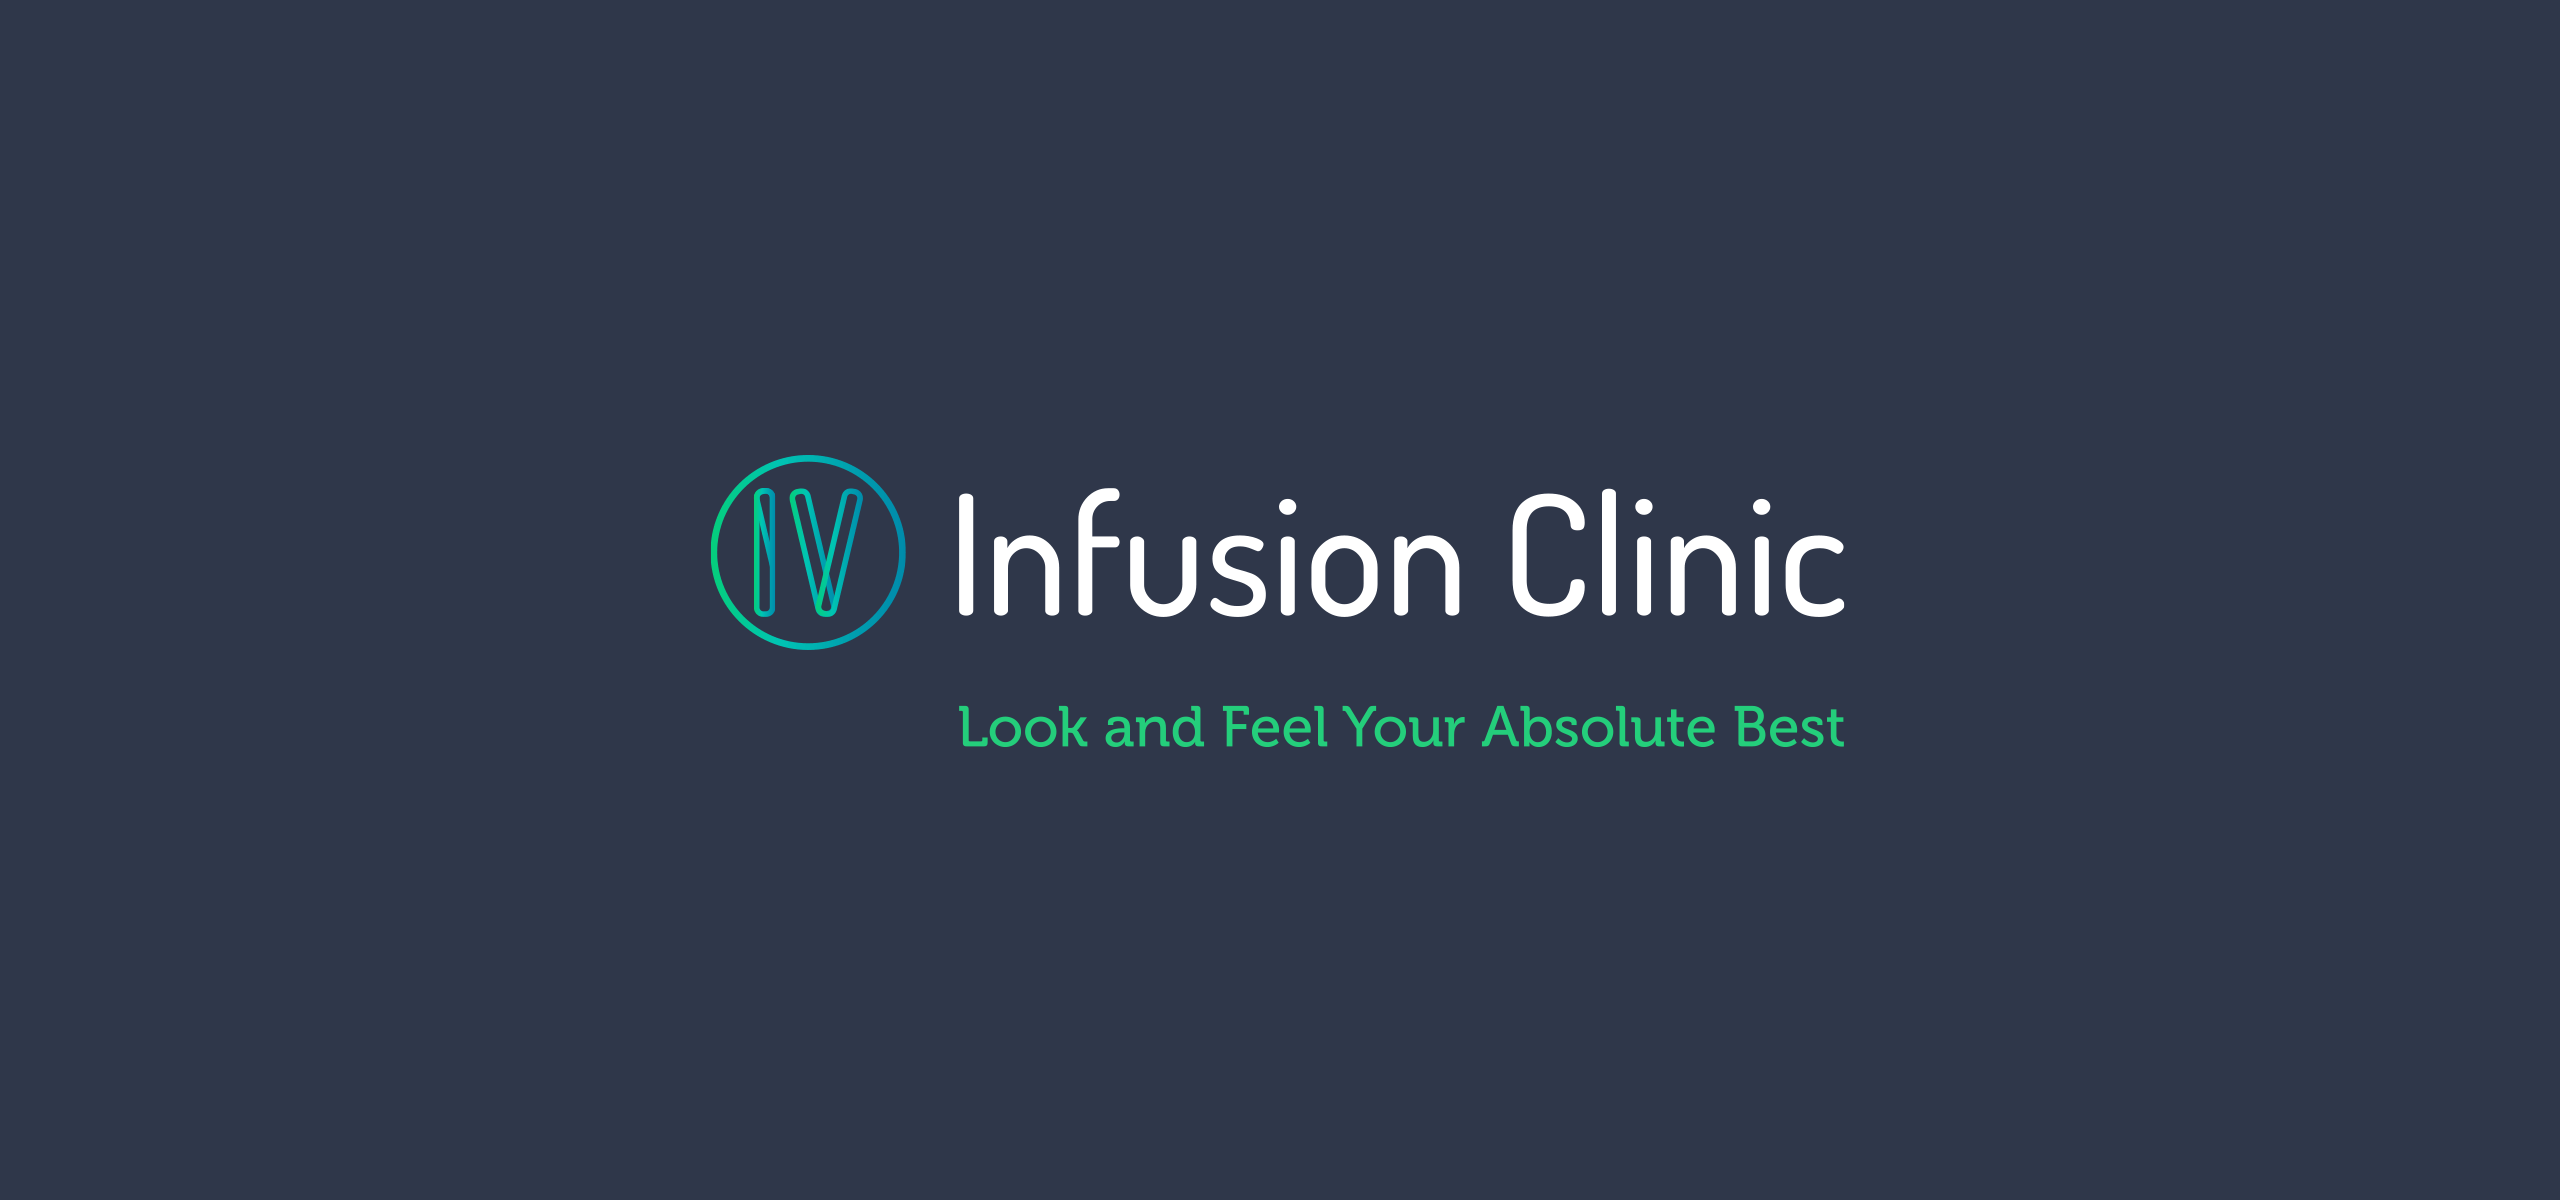 IV Infusion Clinic Logotype